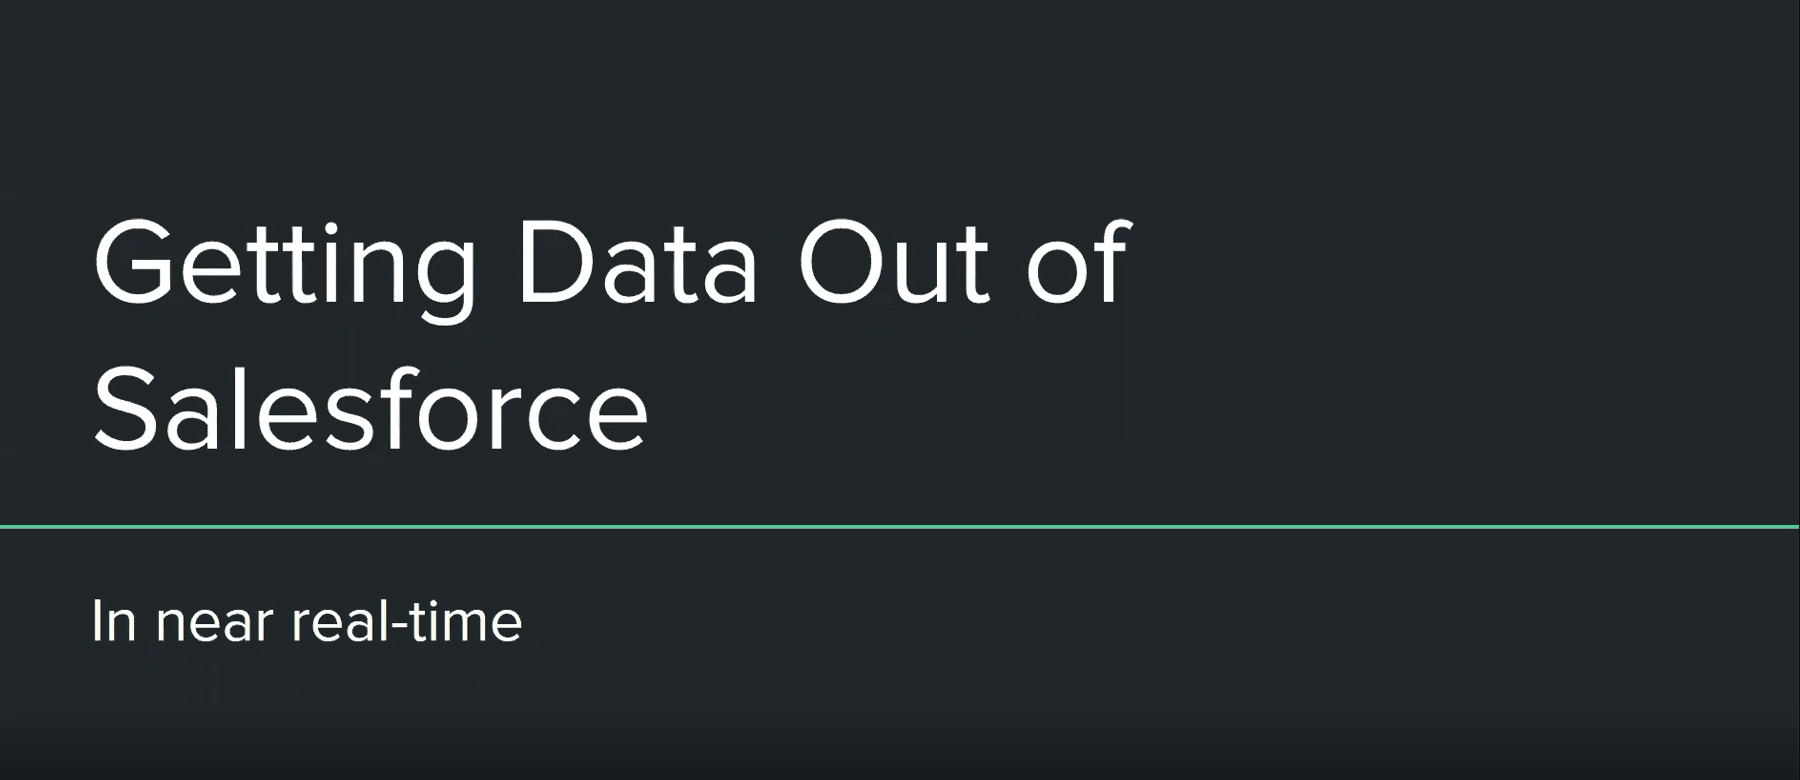 Getting data out of Salesforce in near-realtime